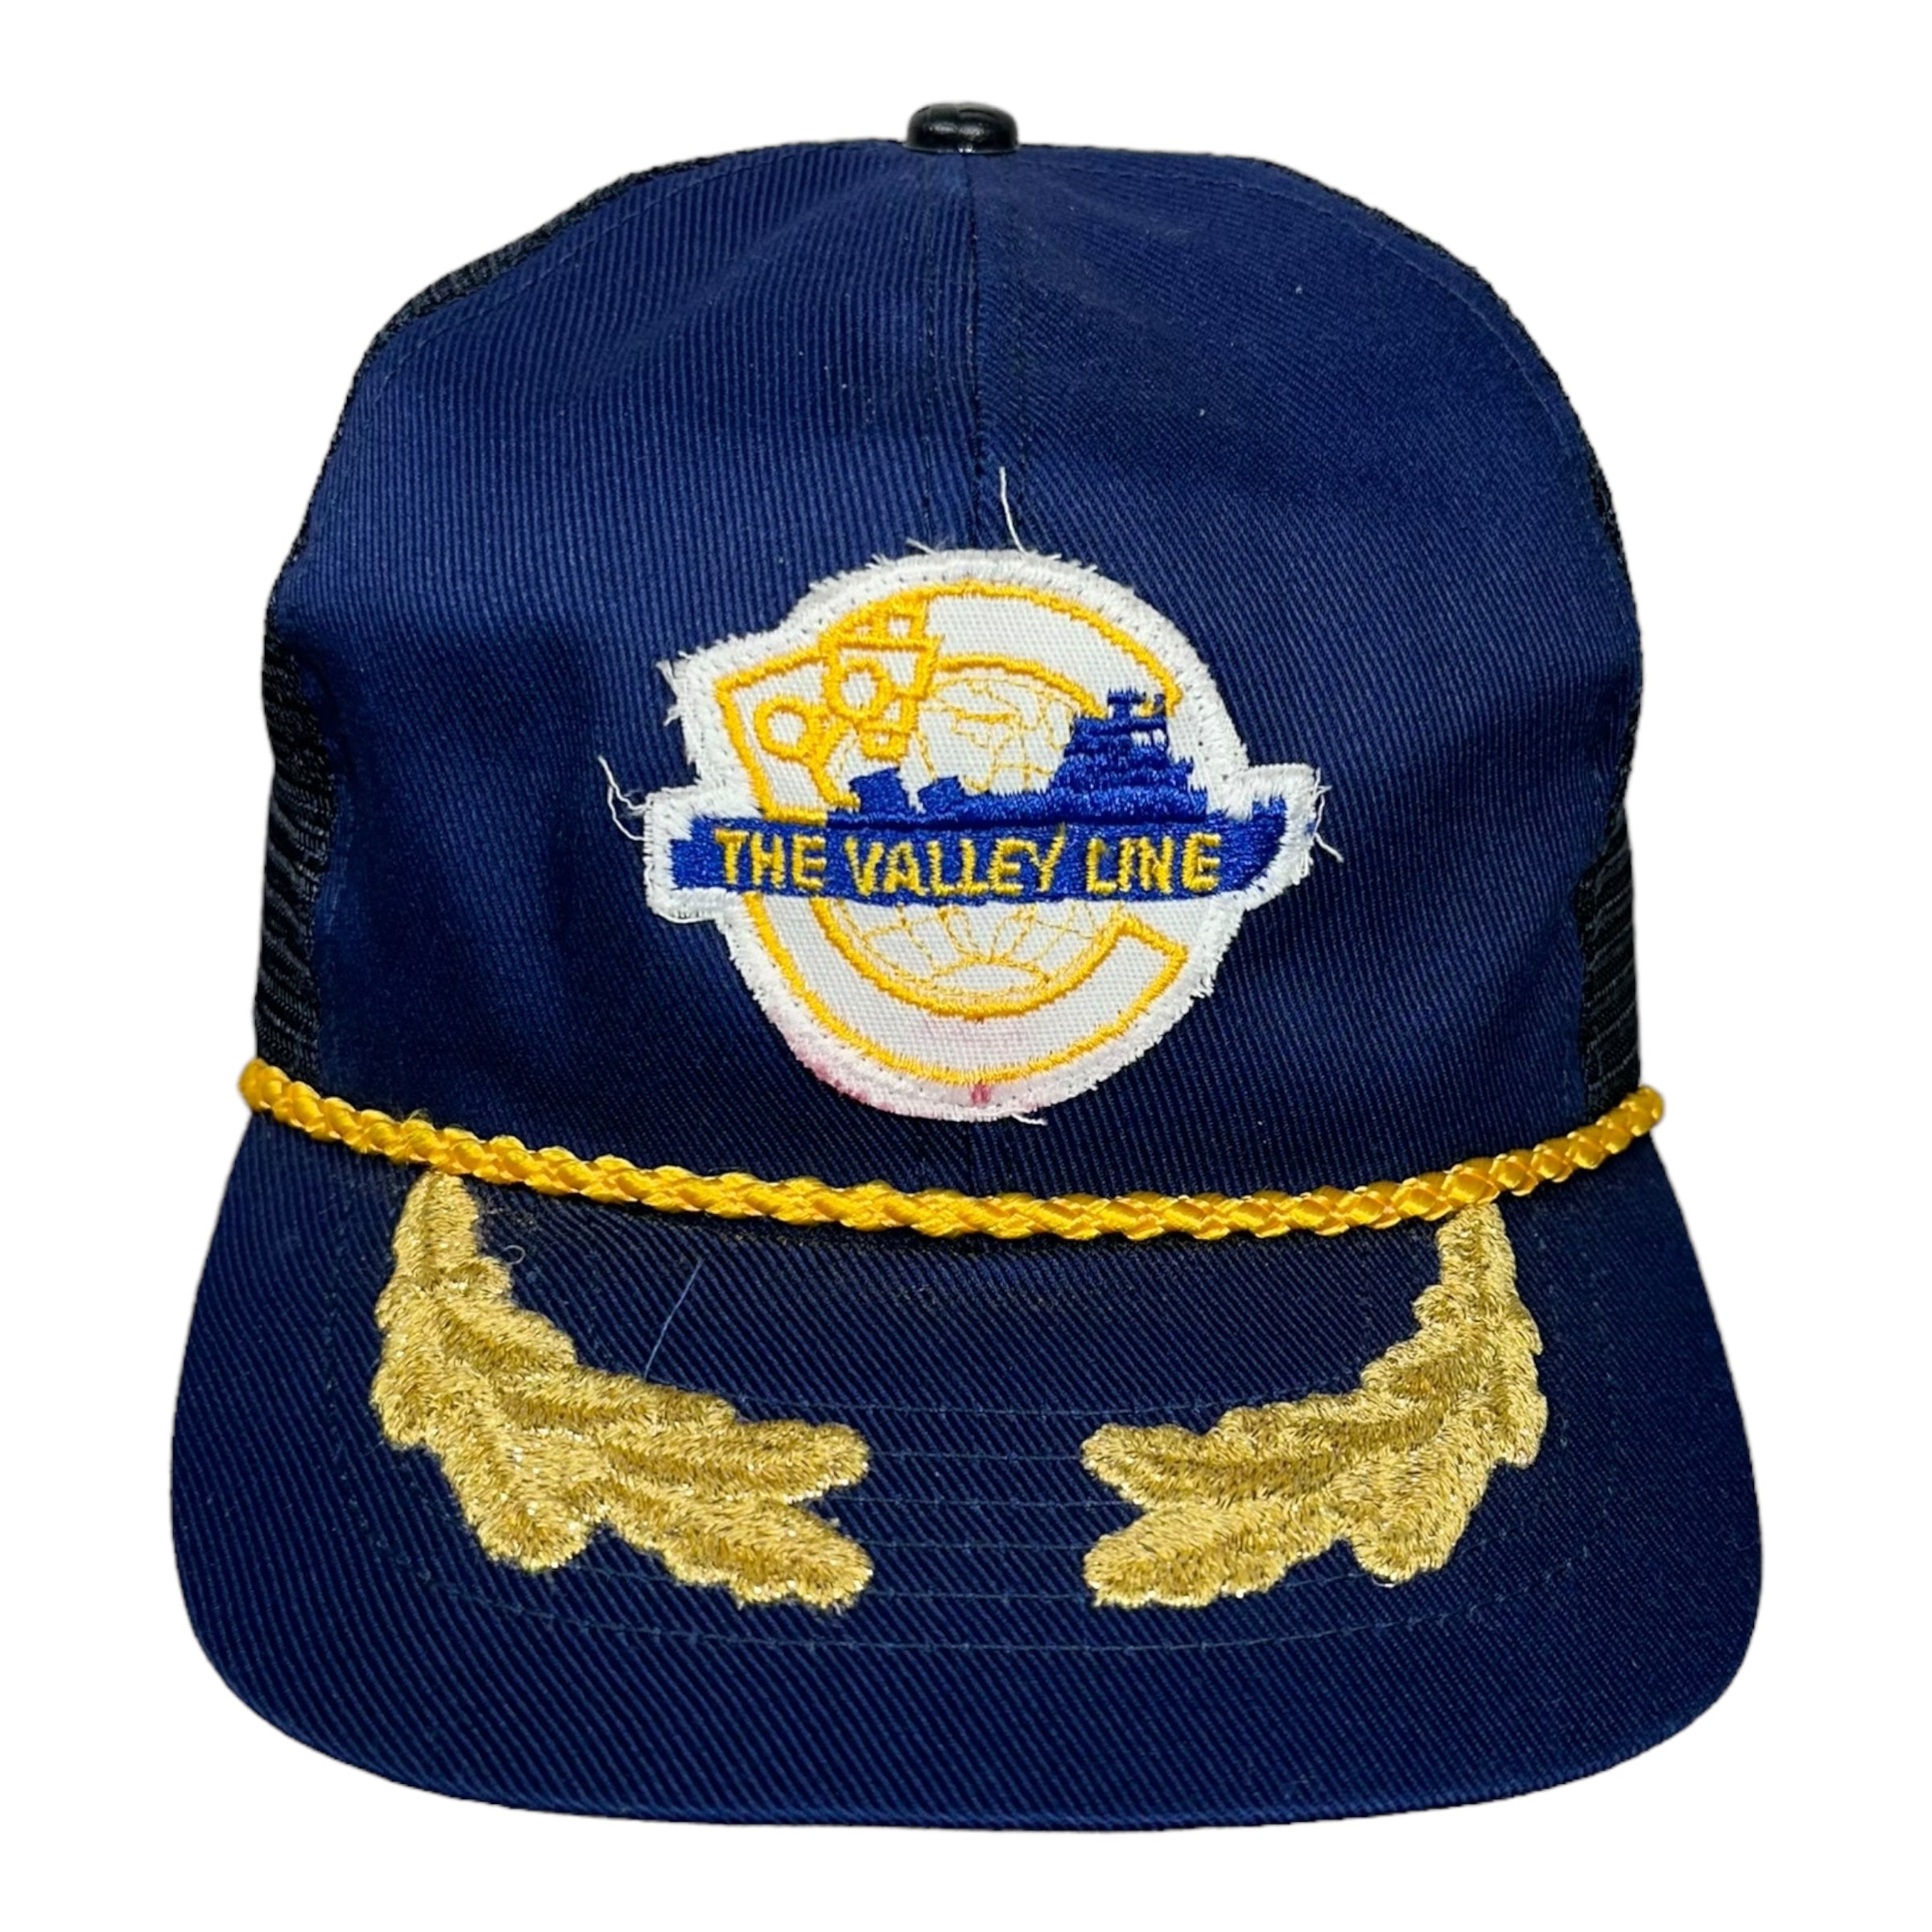 Vintage The Vally Line Rope Lace Trucker Snapback